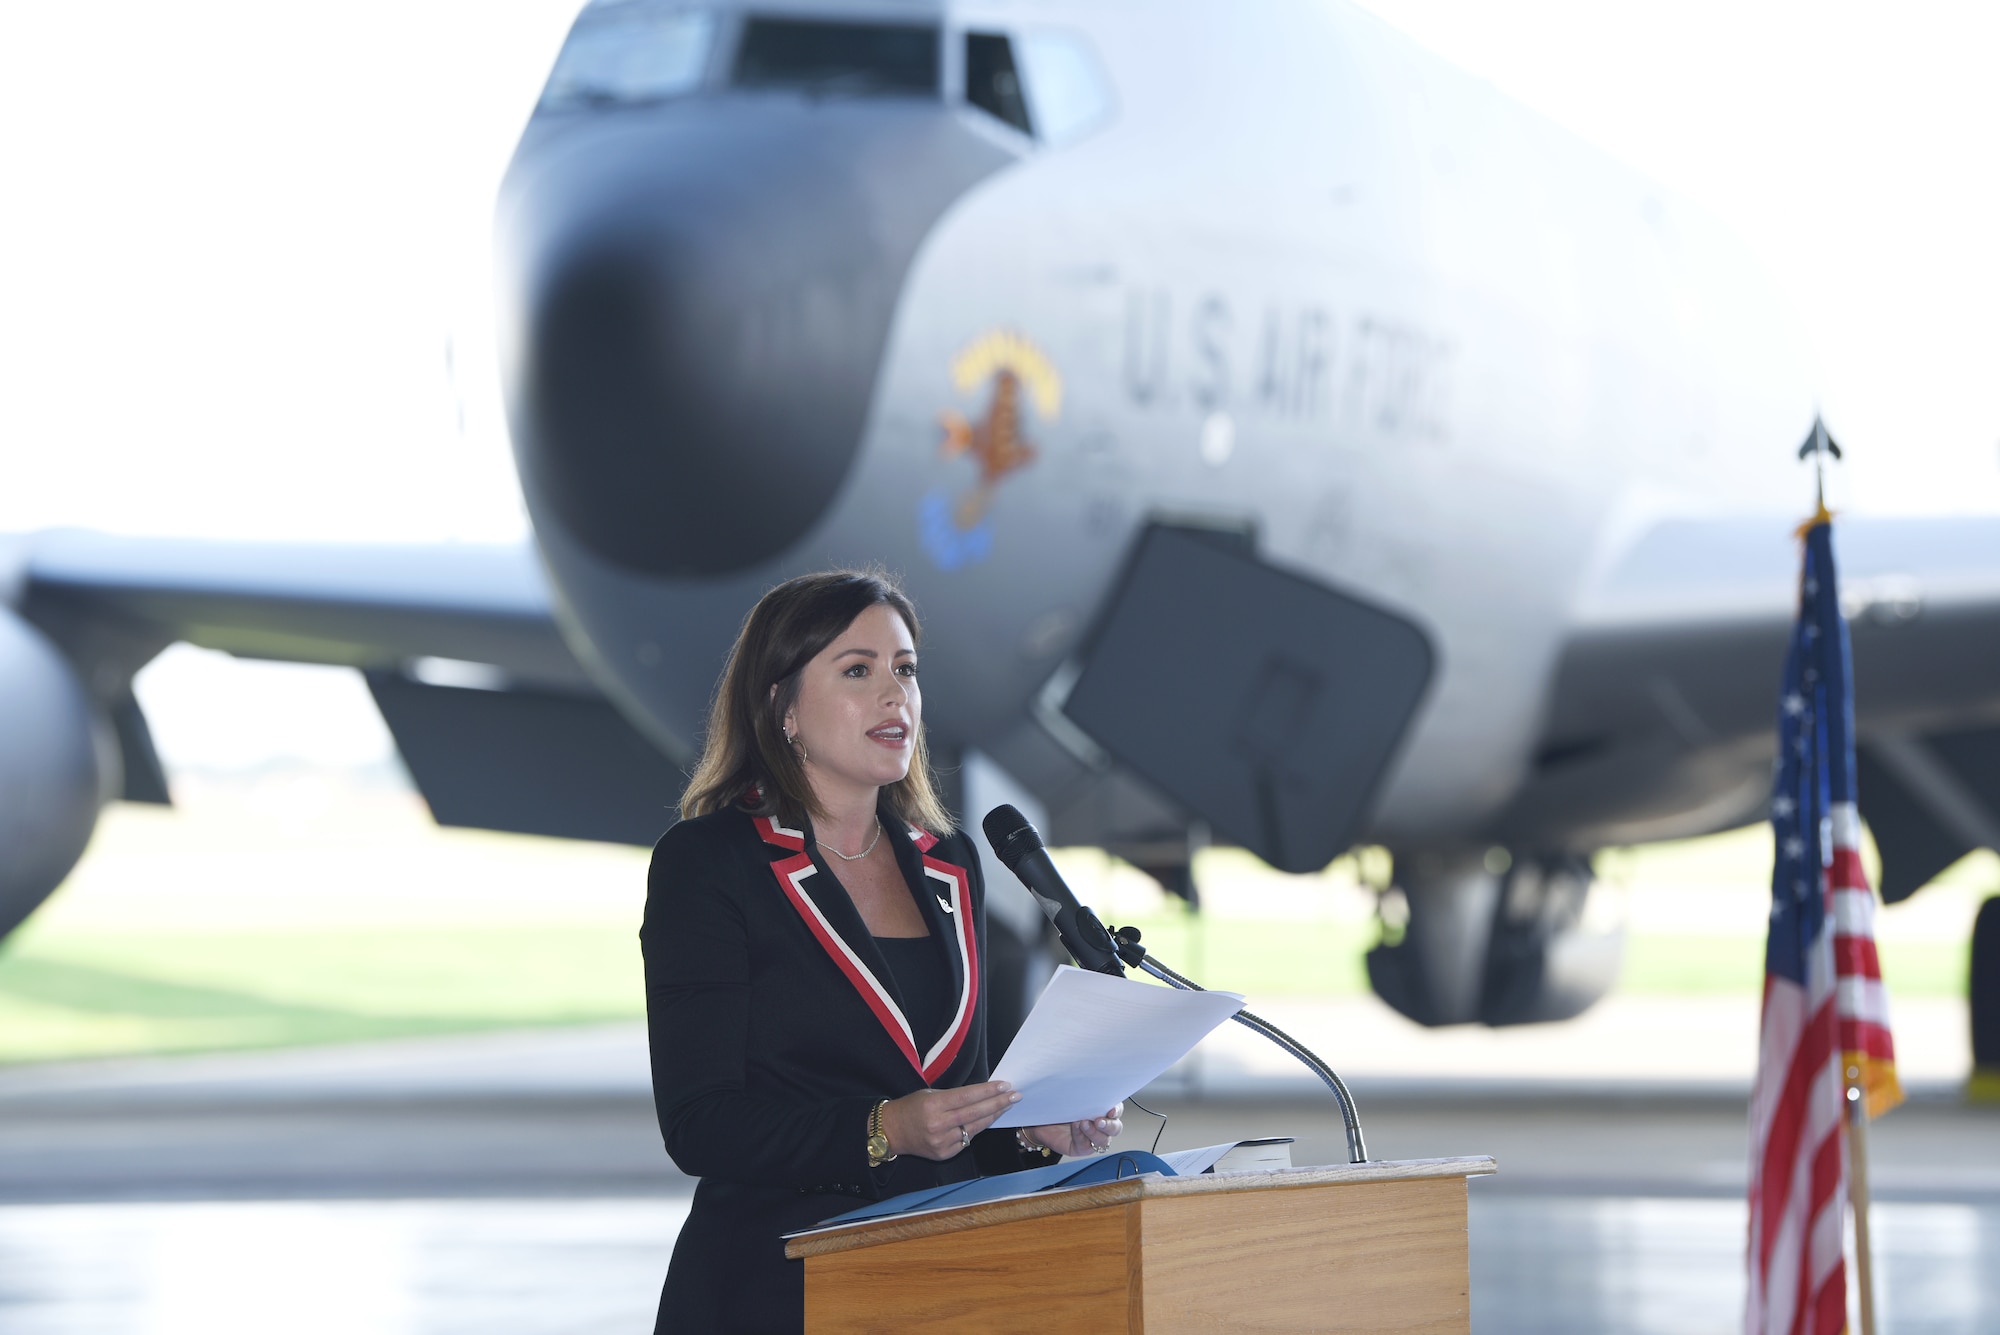 Chloe Melas, granddaughter of Capt. Frank Murphy, 100th Bomb Group veteran and B-17 Flying Fortress navigator, shares some of her grandfather’s memories and experiences during his time flying combat missions out of Thorpe Abbotts, Norfolk, England, during World War II at the nose art dedication ceremony at Royal Air Force Mildenhall, England, Oct. 10, 2023. The ceremony saw the unveiling of the two latest heritage nose art on KC-135 Stratotankers from the 100th Air Refueling Wing. (U.S. Air Force photo by Karen Abeyasekere)